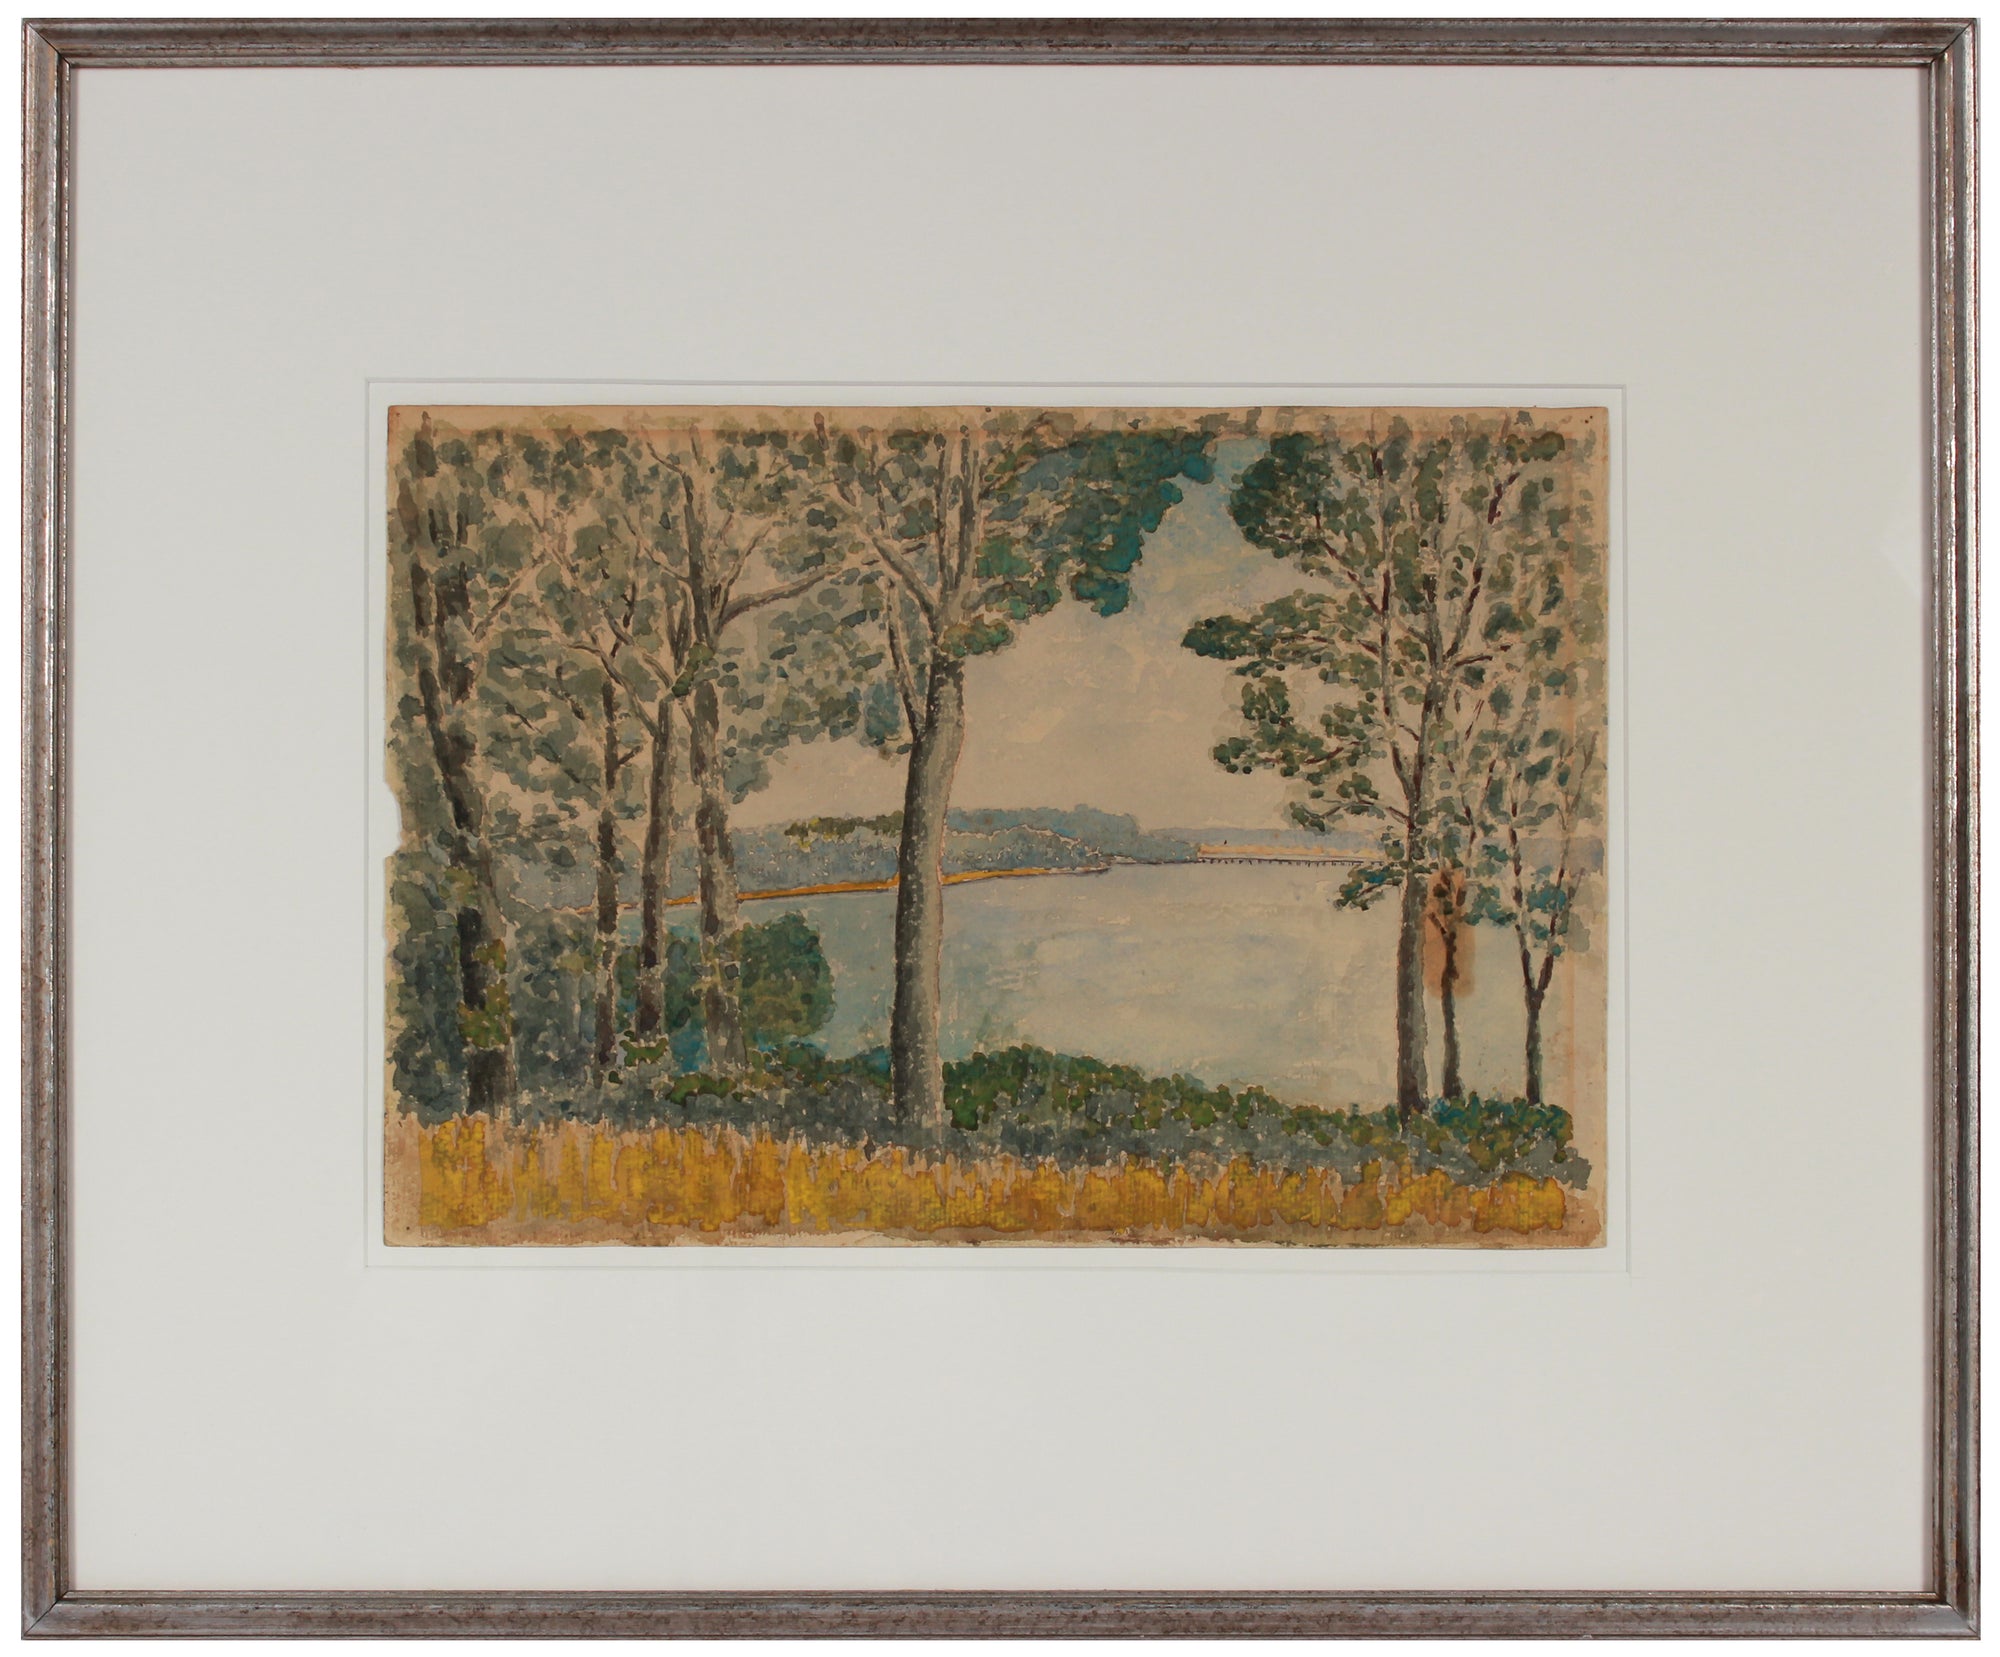 Serene Tree-Lined Lake Scene <br>Early 20th Century Watercolor <br><br>#1107